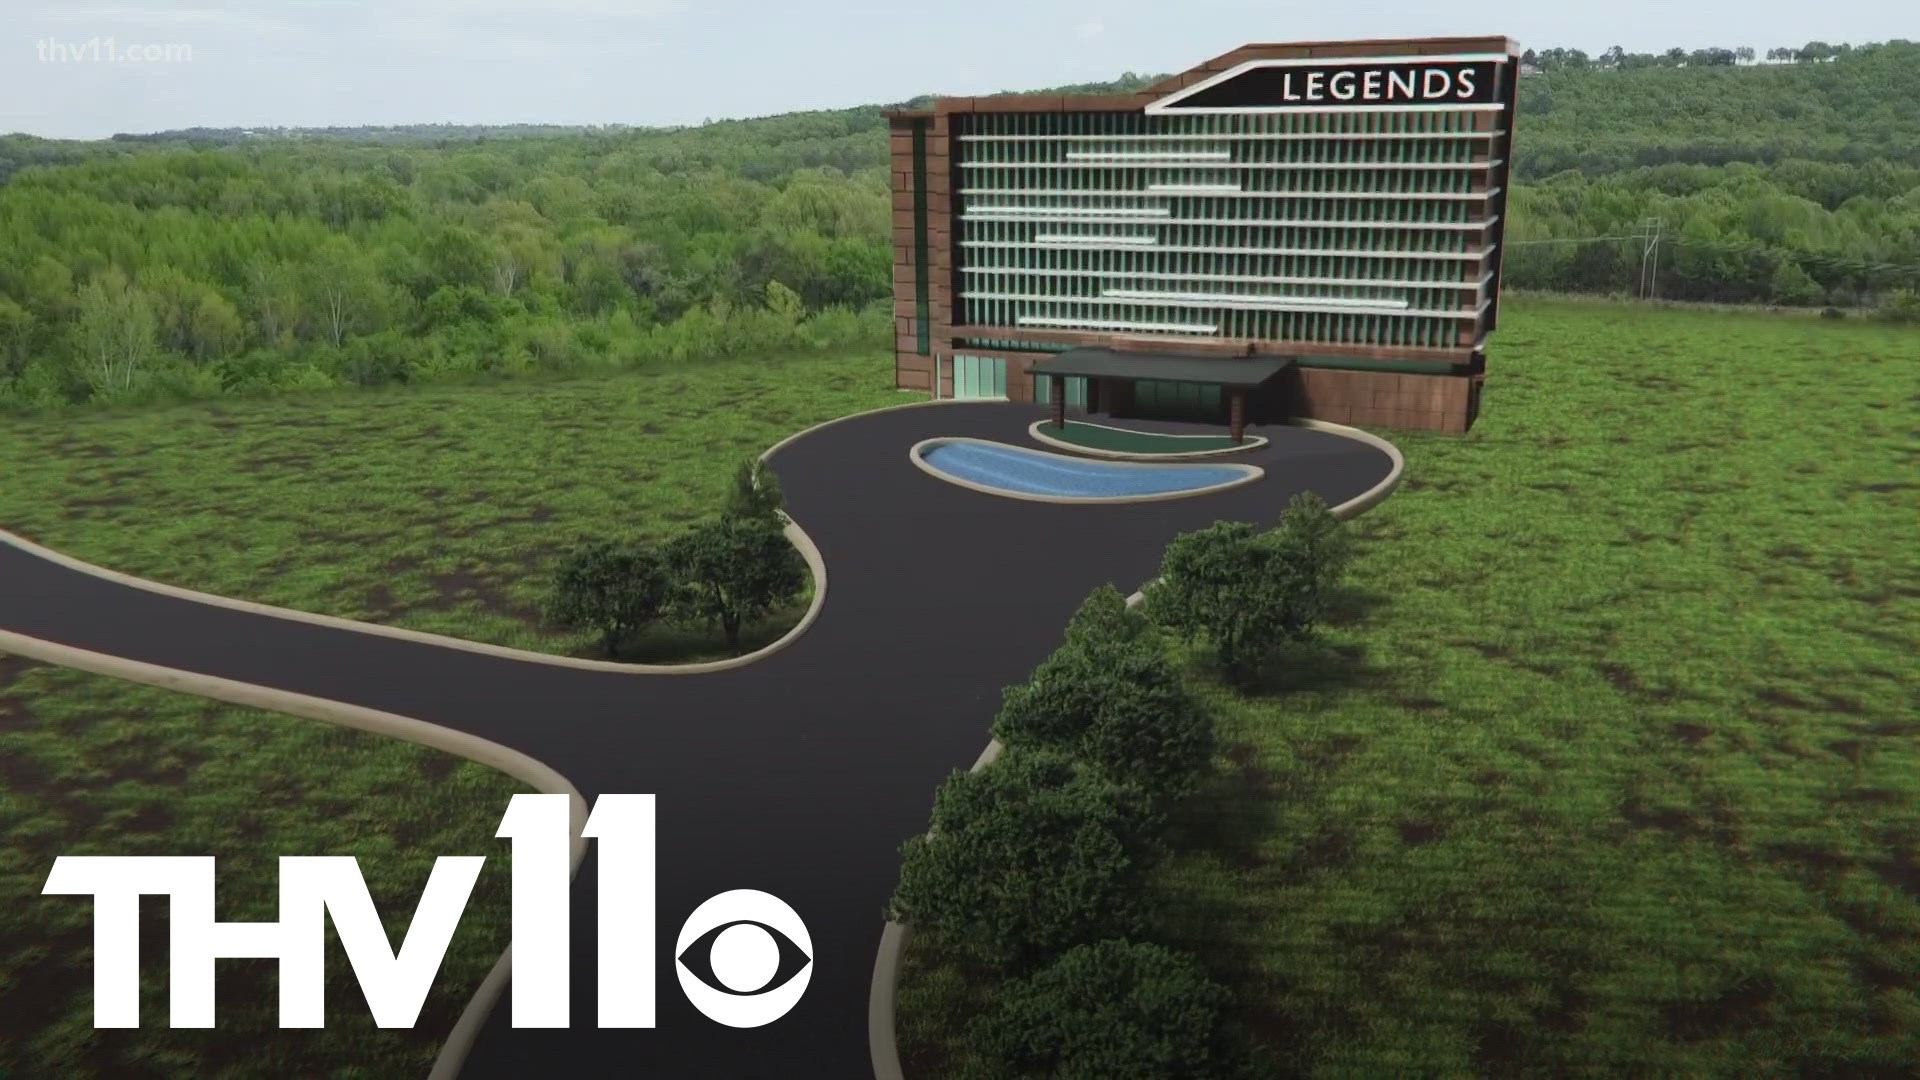 We've been following the development of the Pope County casino since it was announced five years ago. Now, many have been left wondering when it is expected to open.